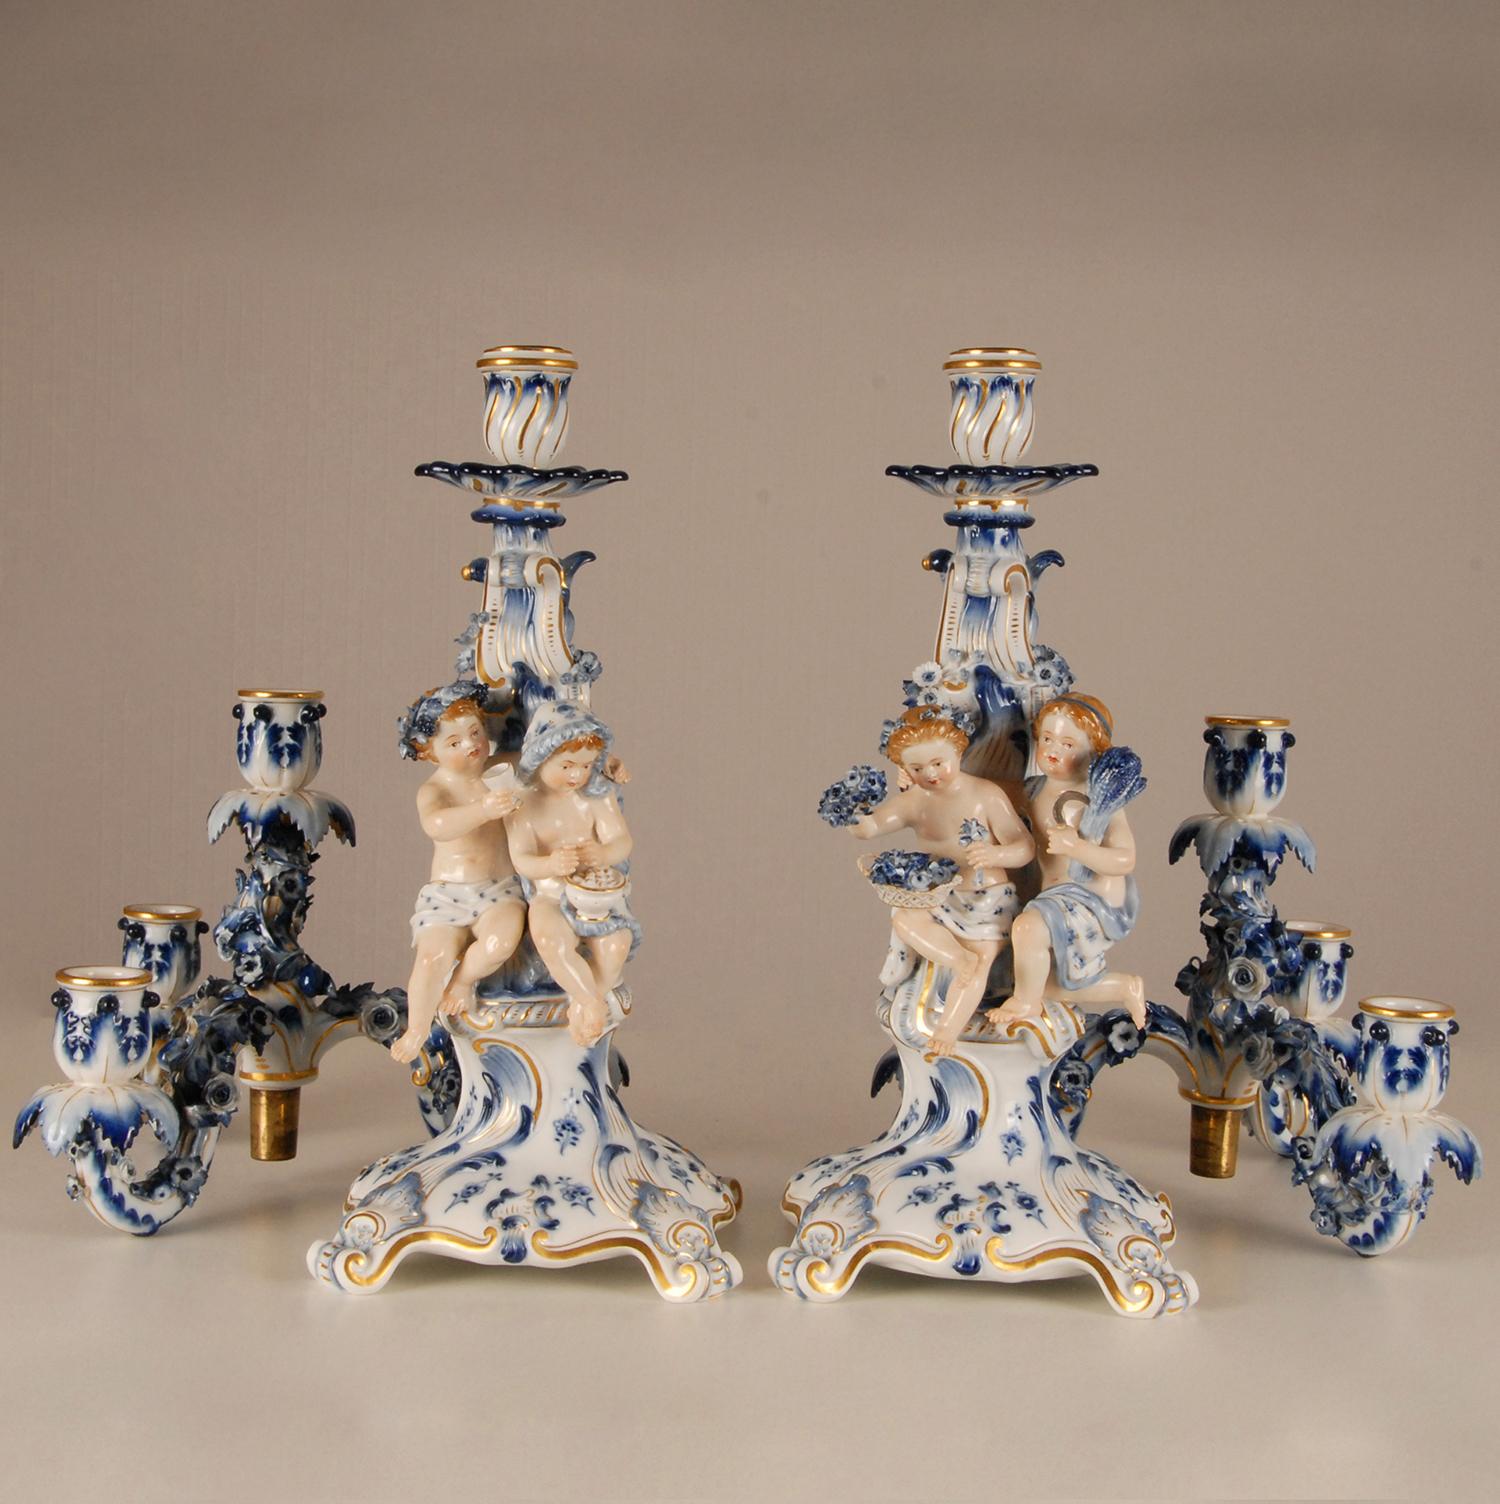 Meissen Porcelain Candelabras antique German porcelain - a pair
Each with 4 lights and 2 figures, emblematic of the four seasons.
The candelabras are made in the blue and white union pattern
Very elaborated with cherubs and loads delicated applied